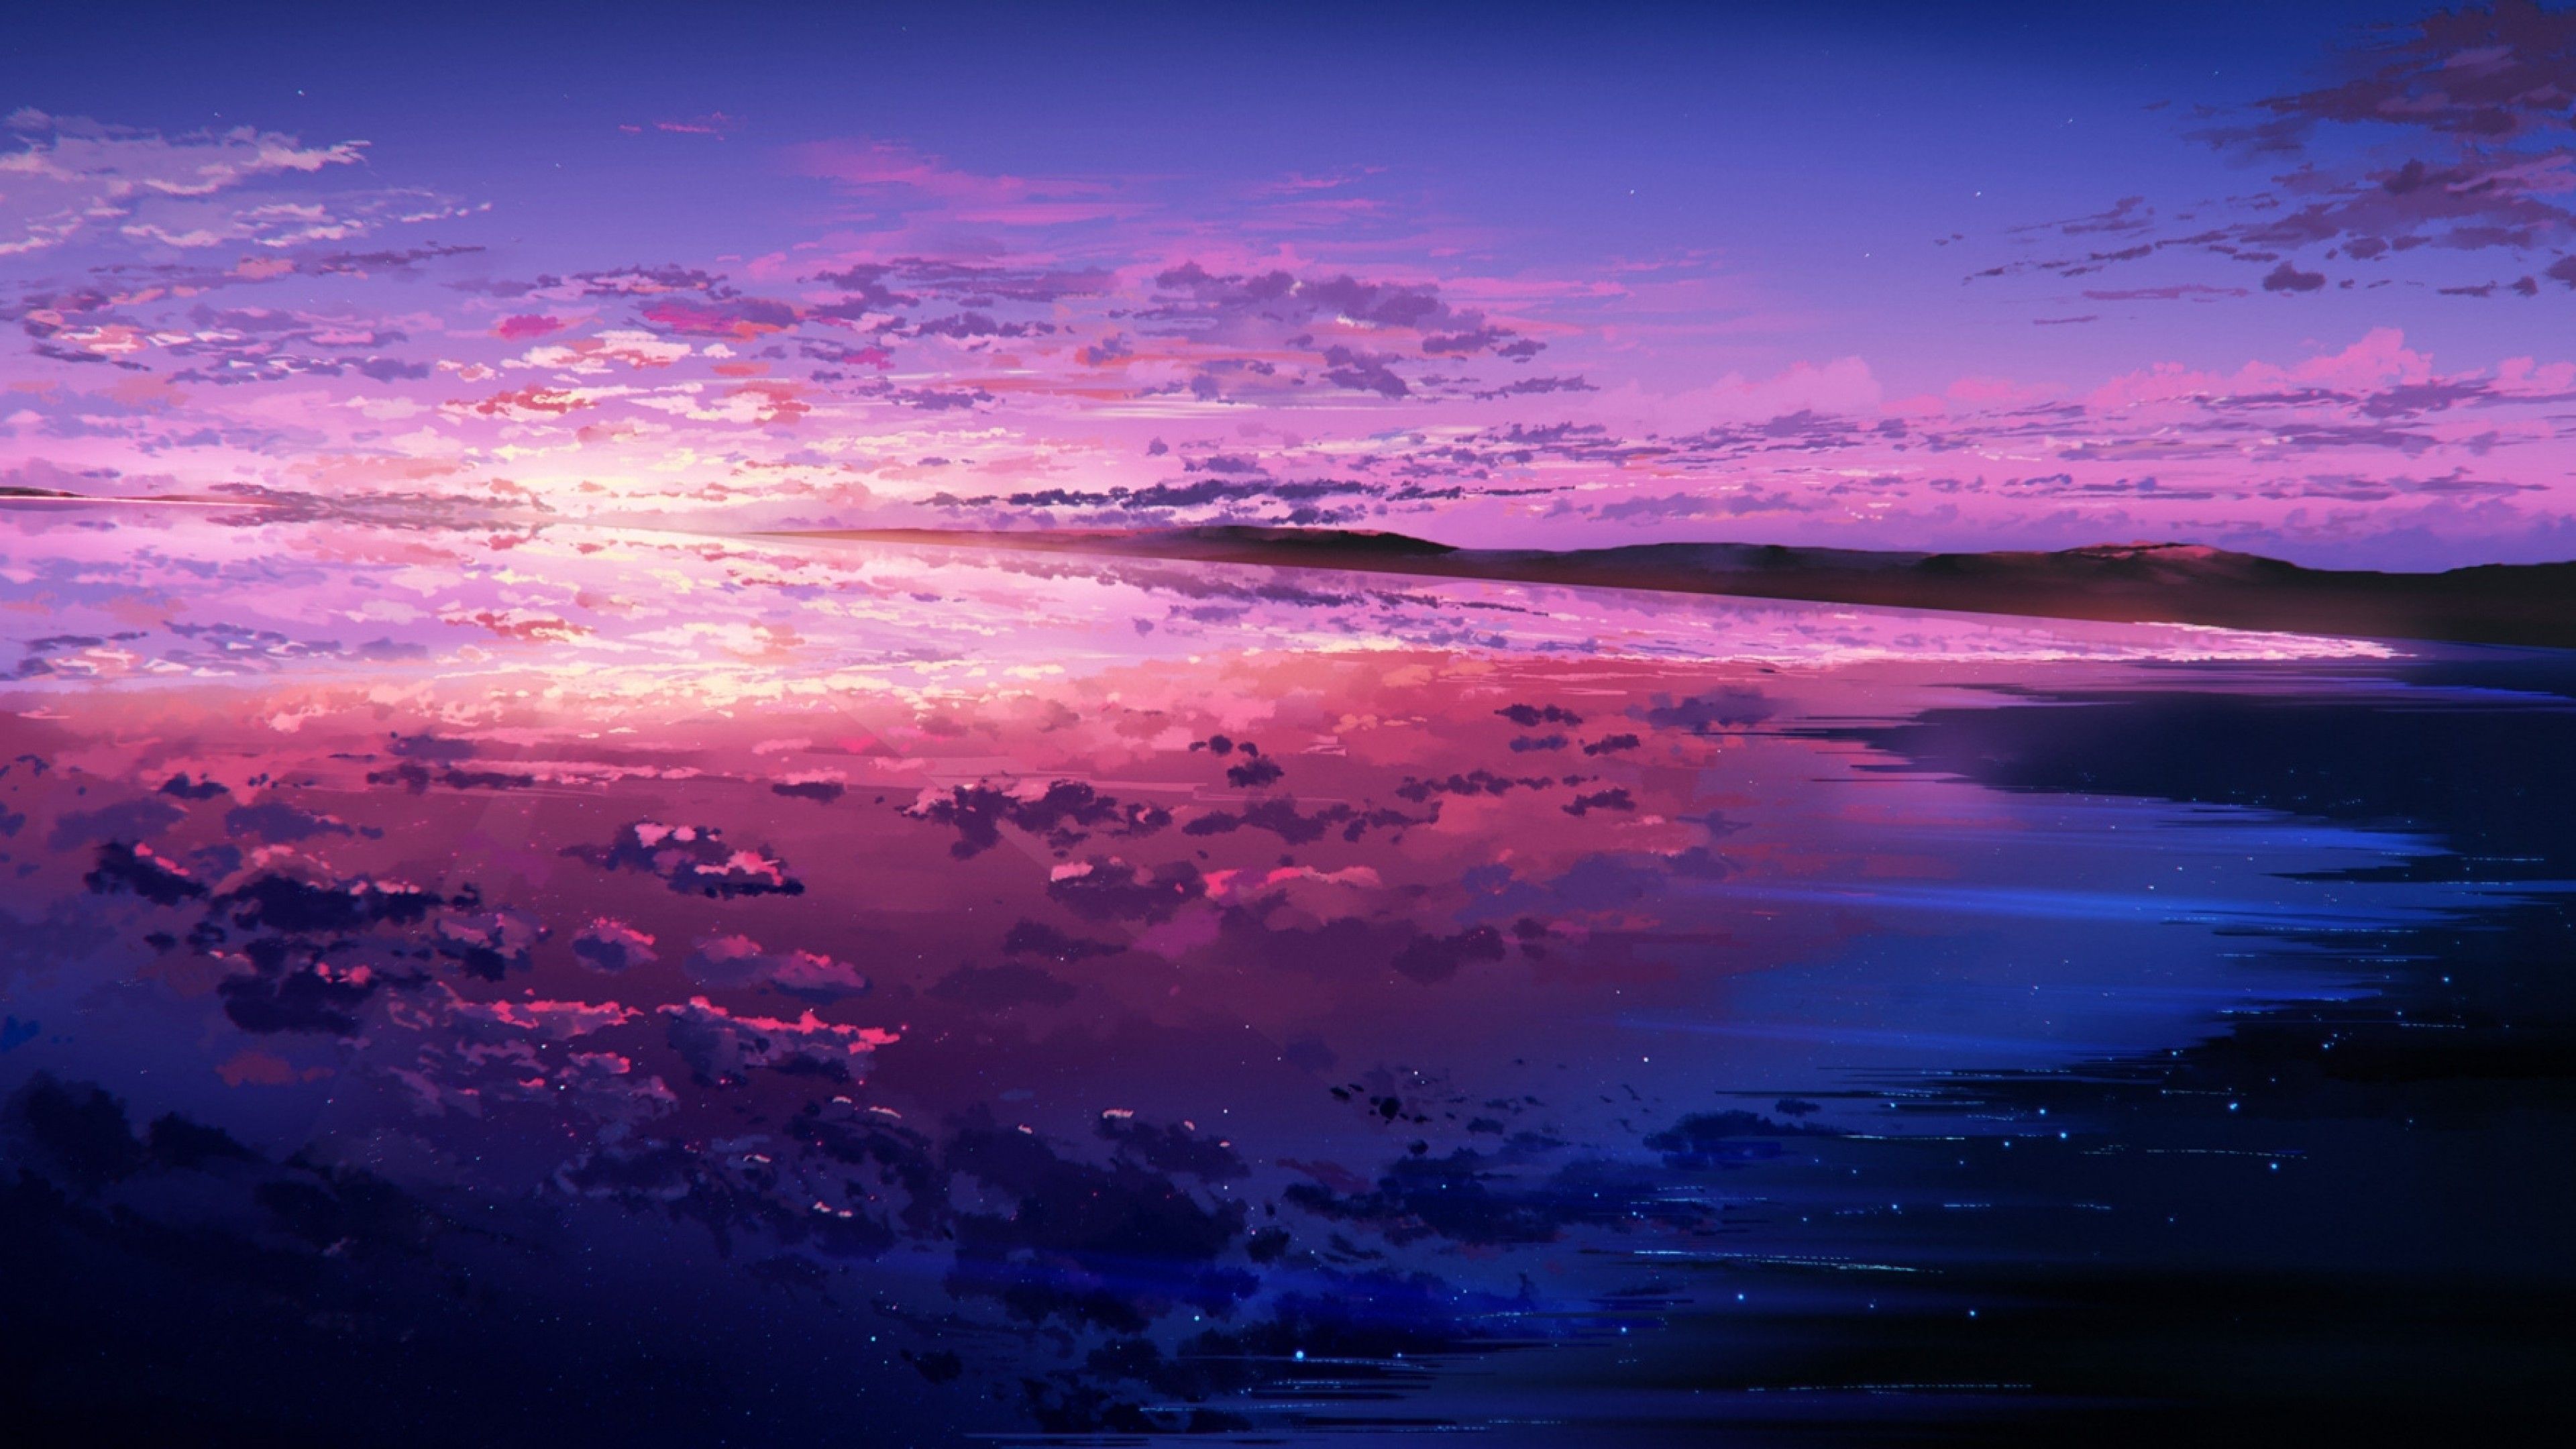 Download 3840x2160 Anime Landscape, Sunset, Scenery, Clouds, Sky